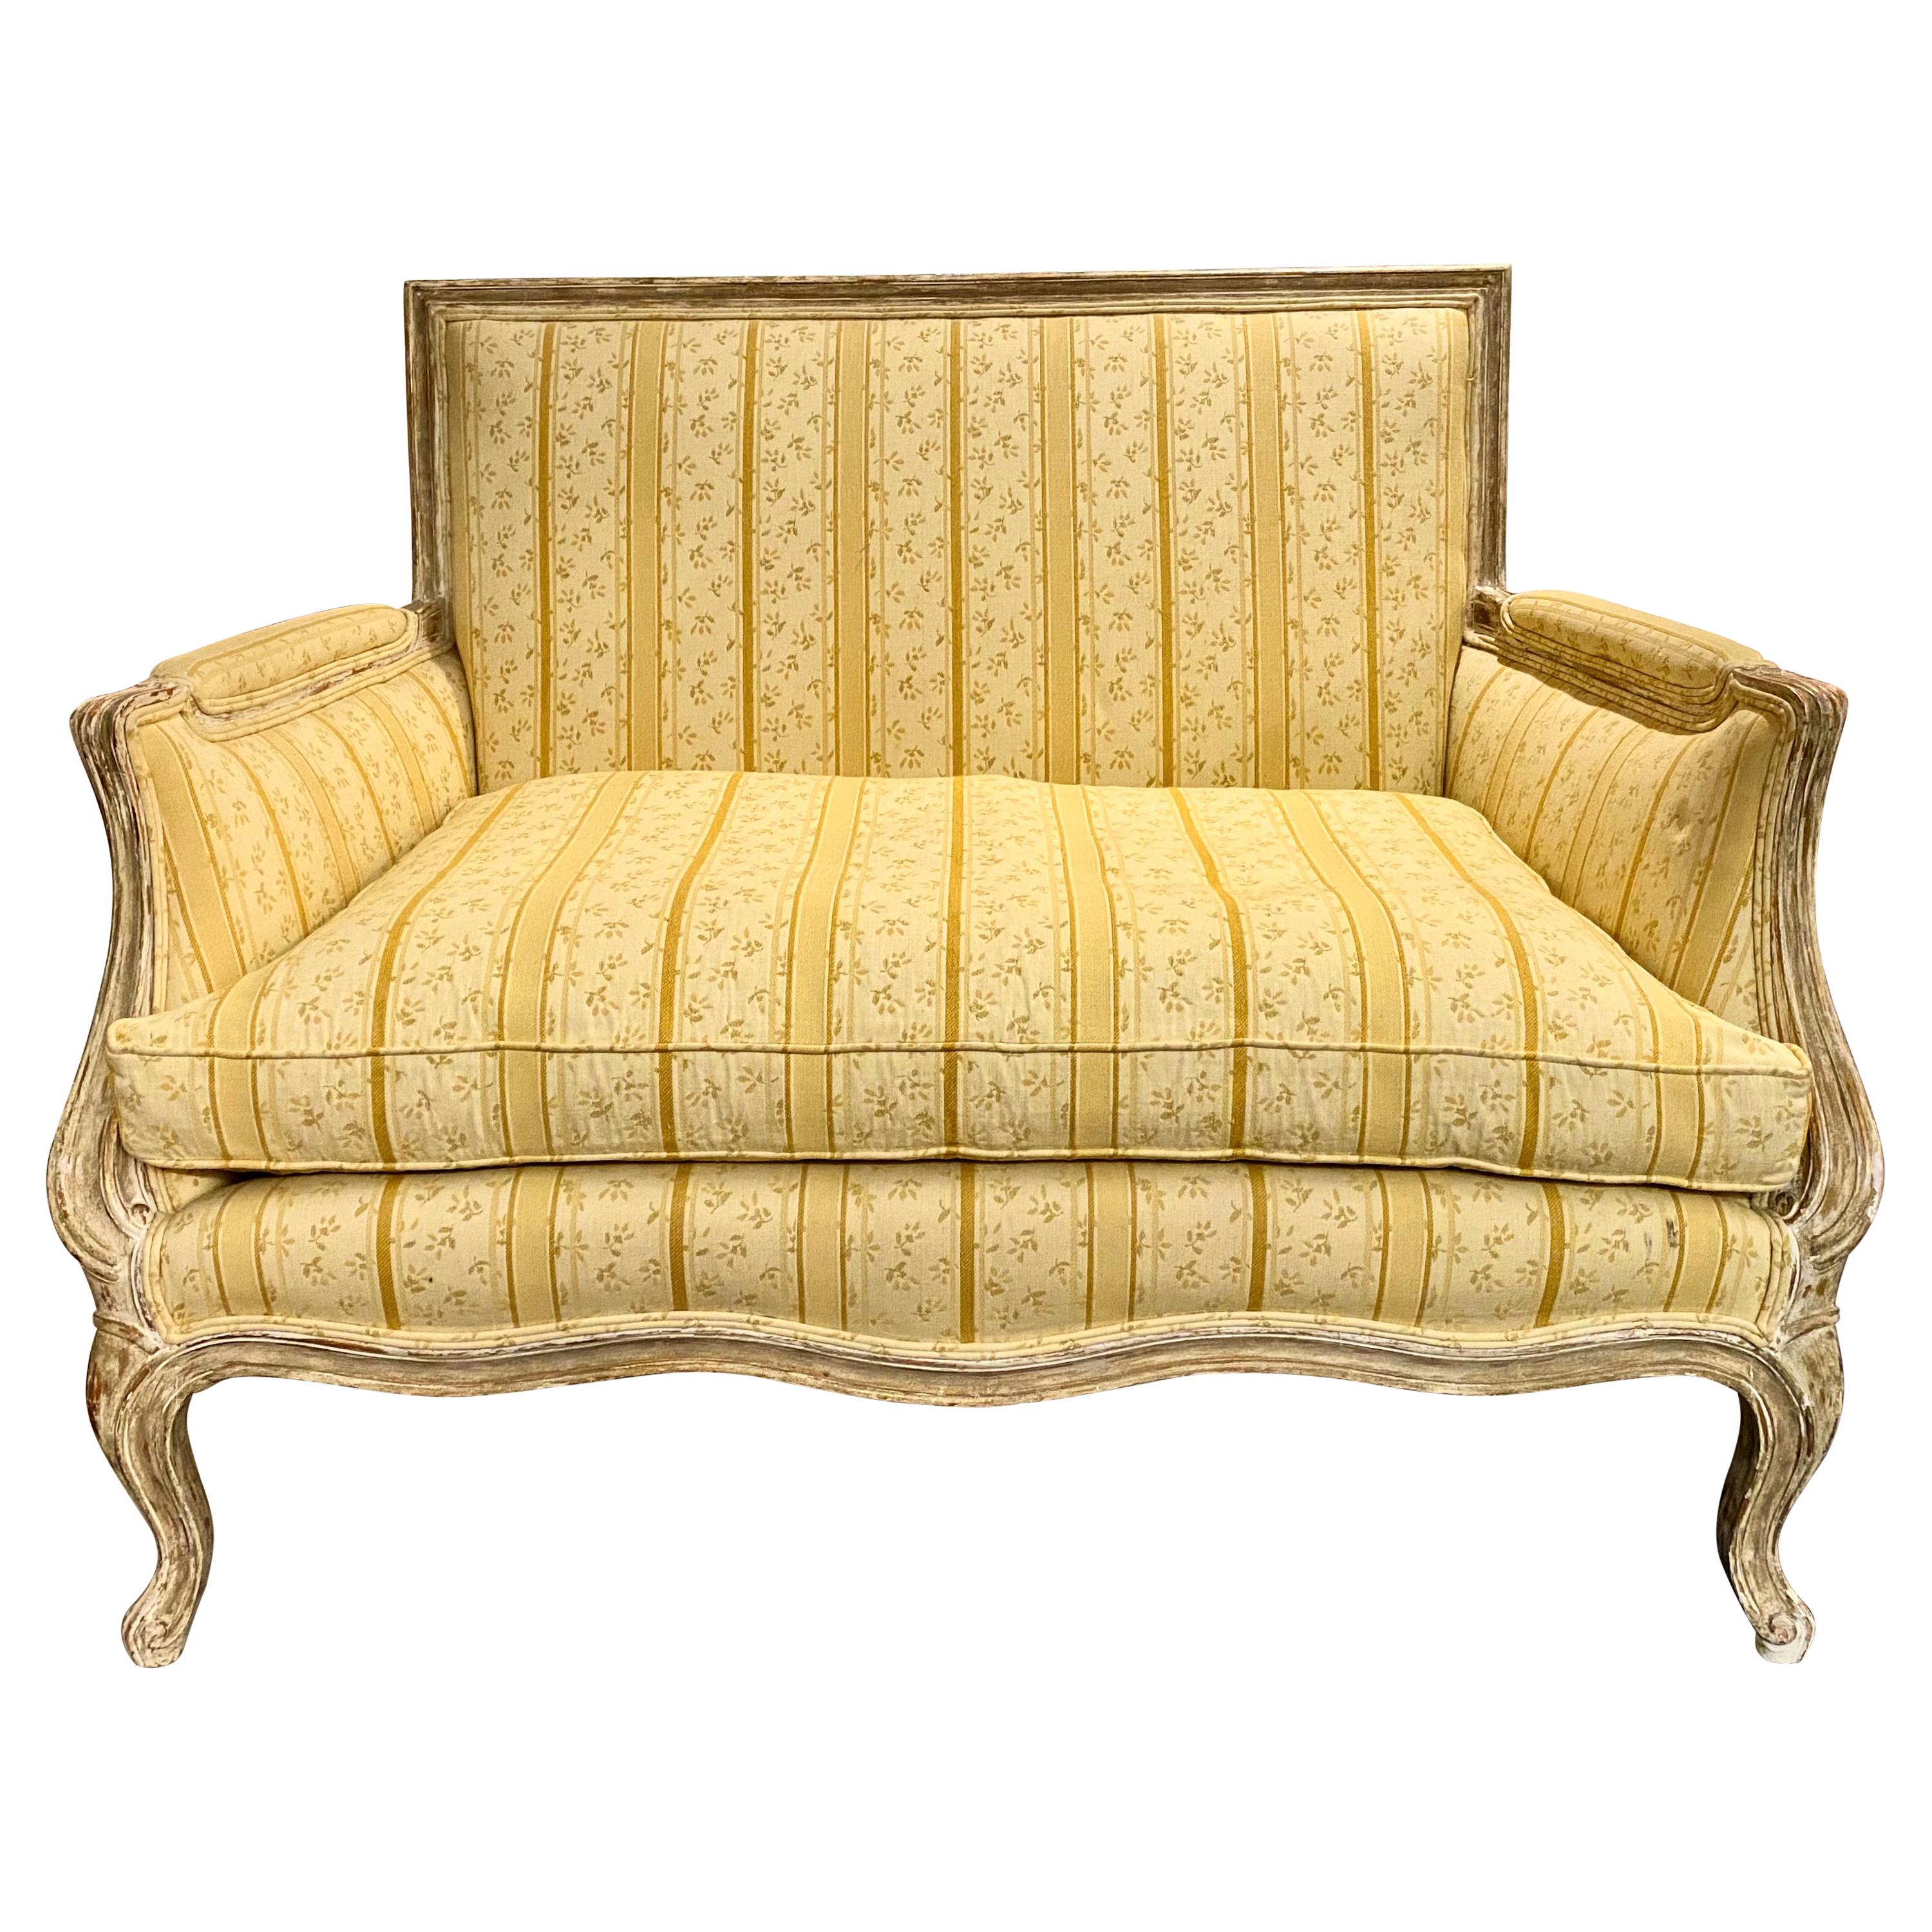 French Louis XV Transition Provençal Settee For Sale